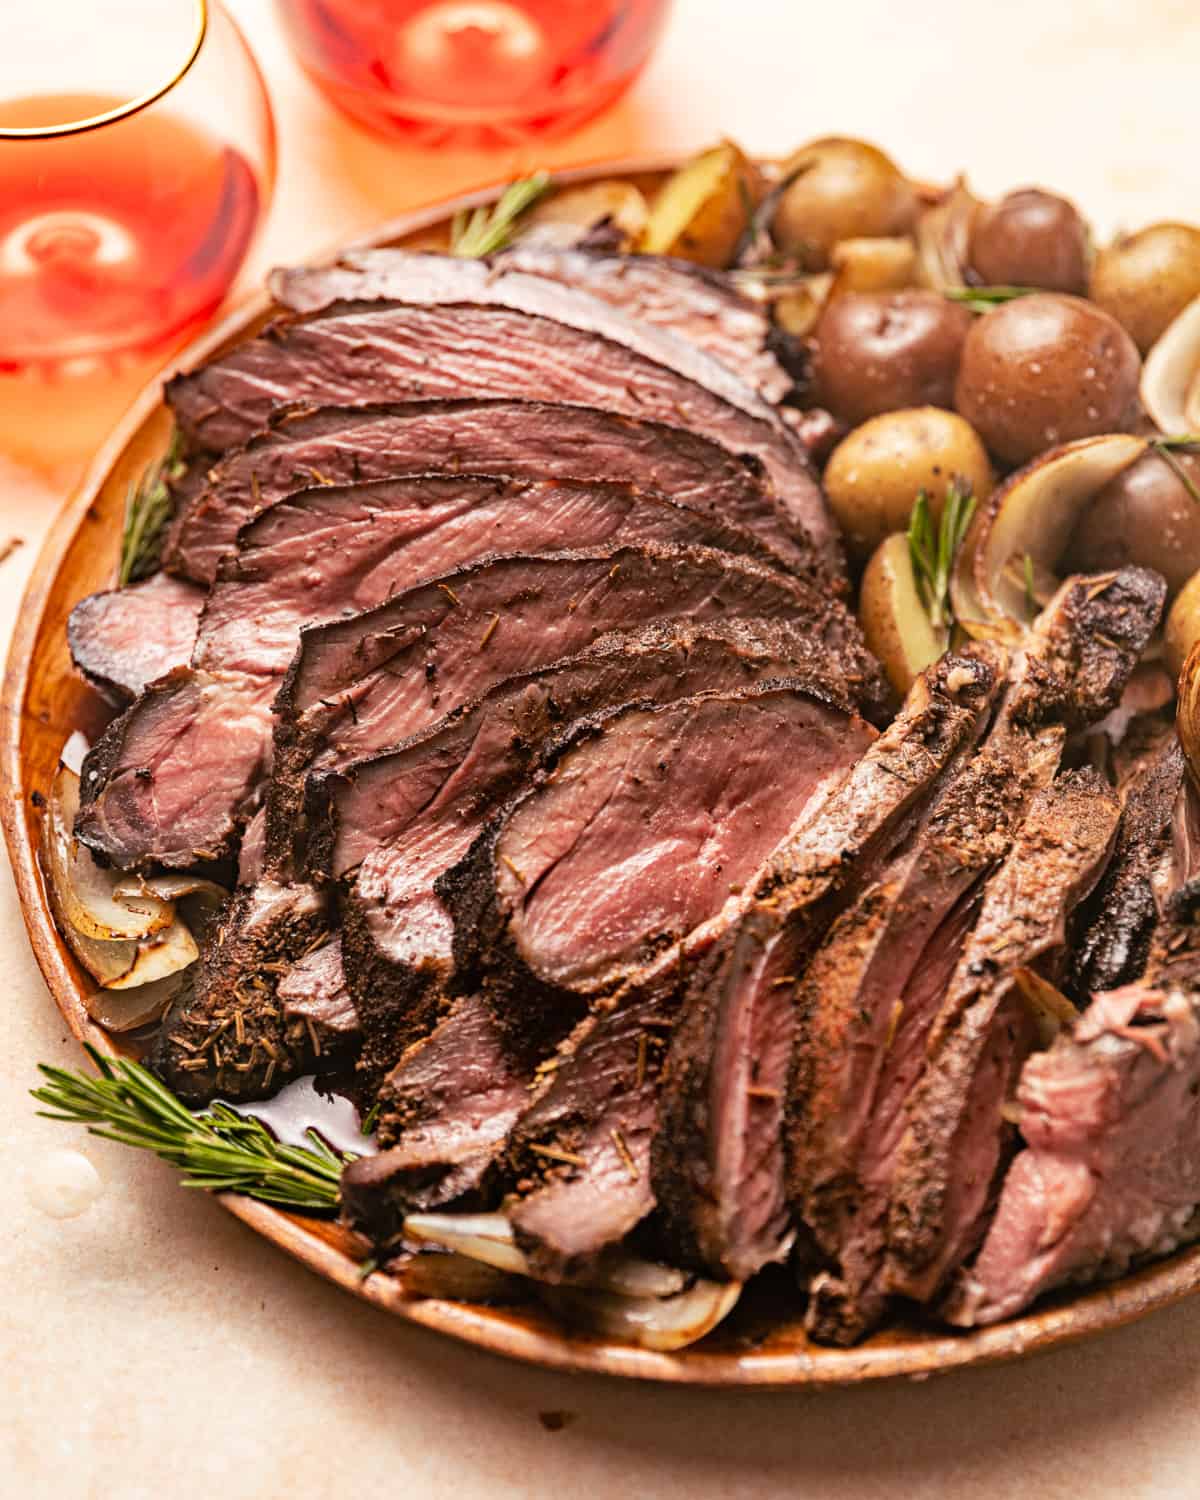 carved smoked leg of lamb garnished with rosemary.